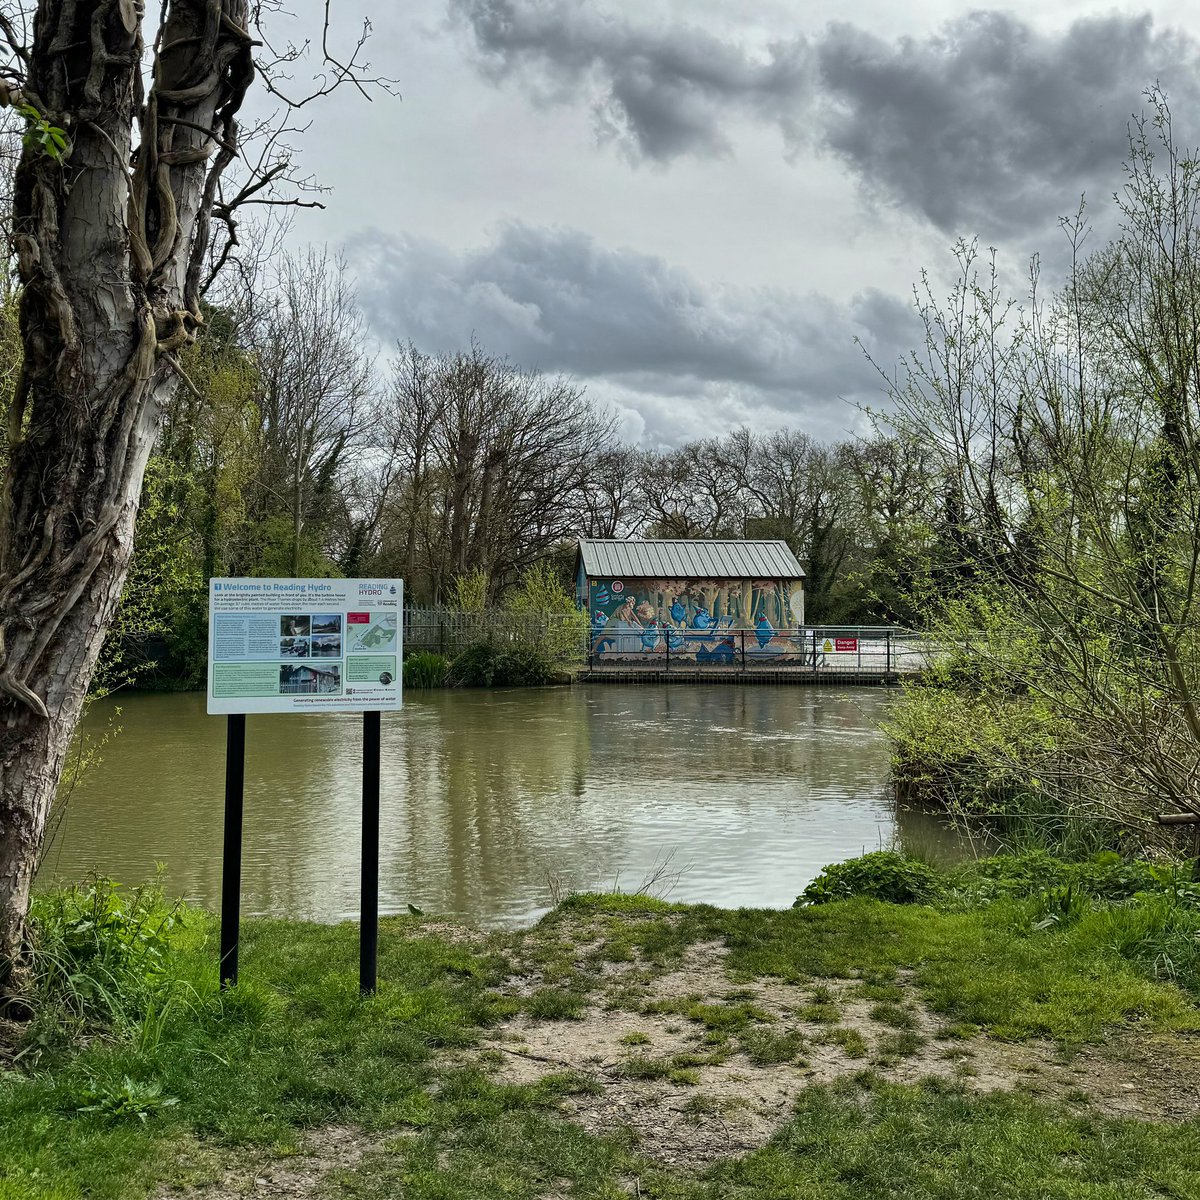 A photo of our site from this weekend, which is generating renewable hydroelectric power down by Caversham Weir from the flow of the River Thames. If you’re nearby, take a look at our infographic boards to find out more! #rdguk #RenewableEnergy